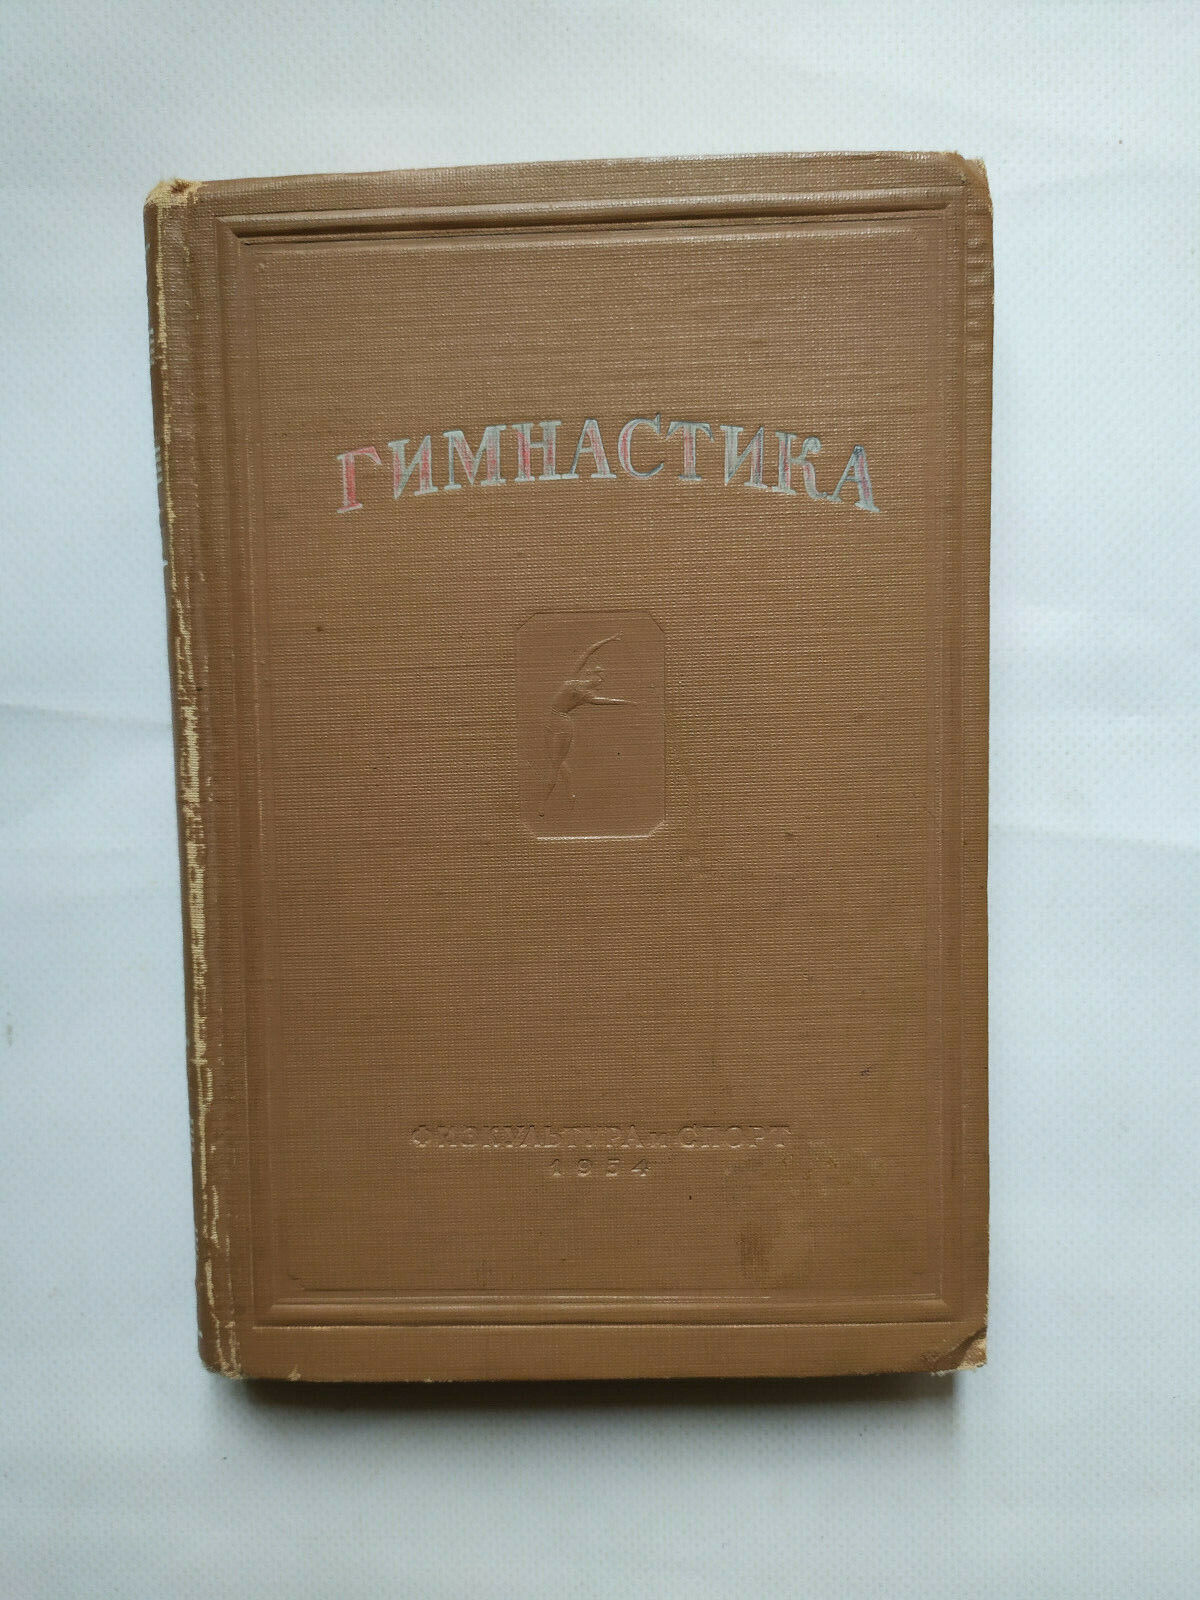 1954 Гимнастика Manual Guide Gymnastics Sport Rare Old Russian Vintage Book 